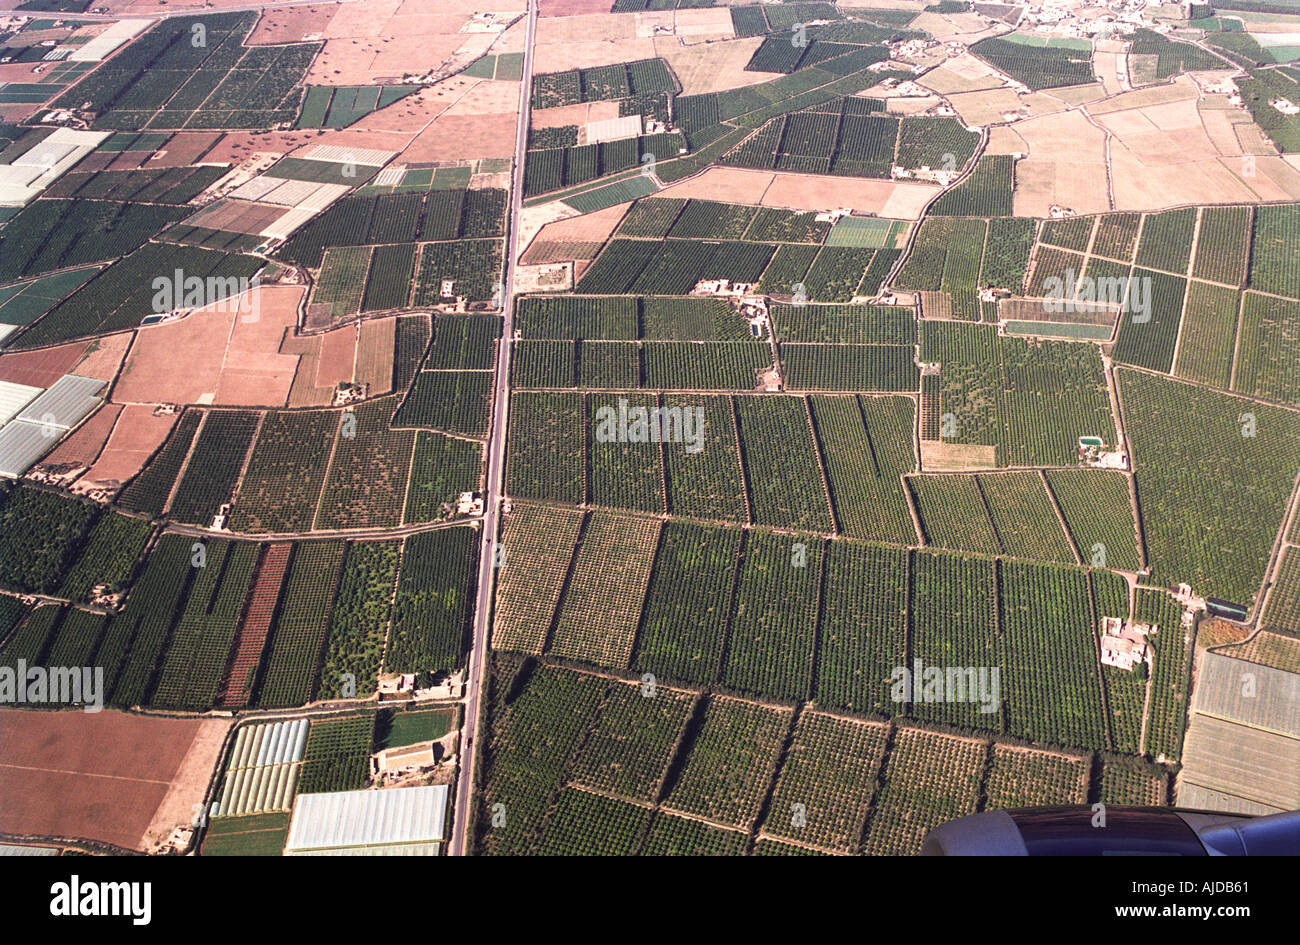 Aerial view agriculture Morocco North Africa HOMER SYKES Stock Photo